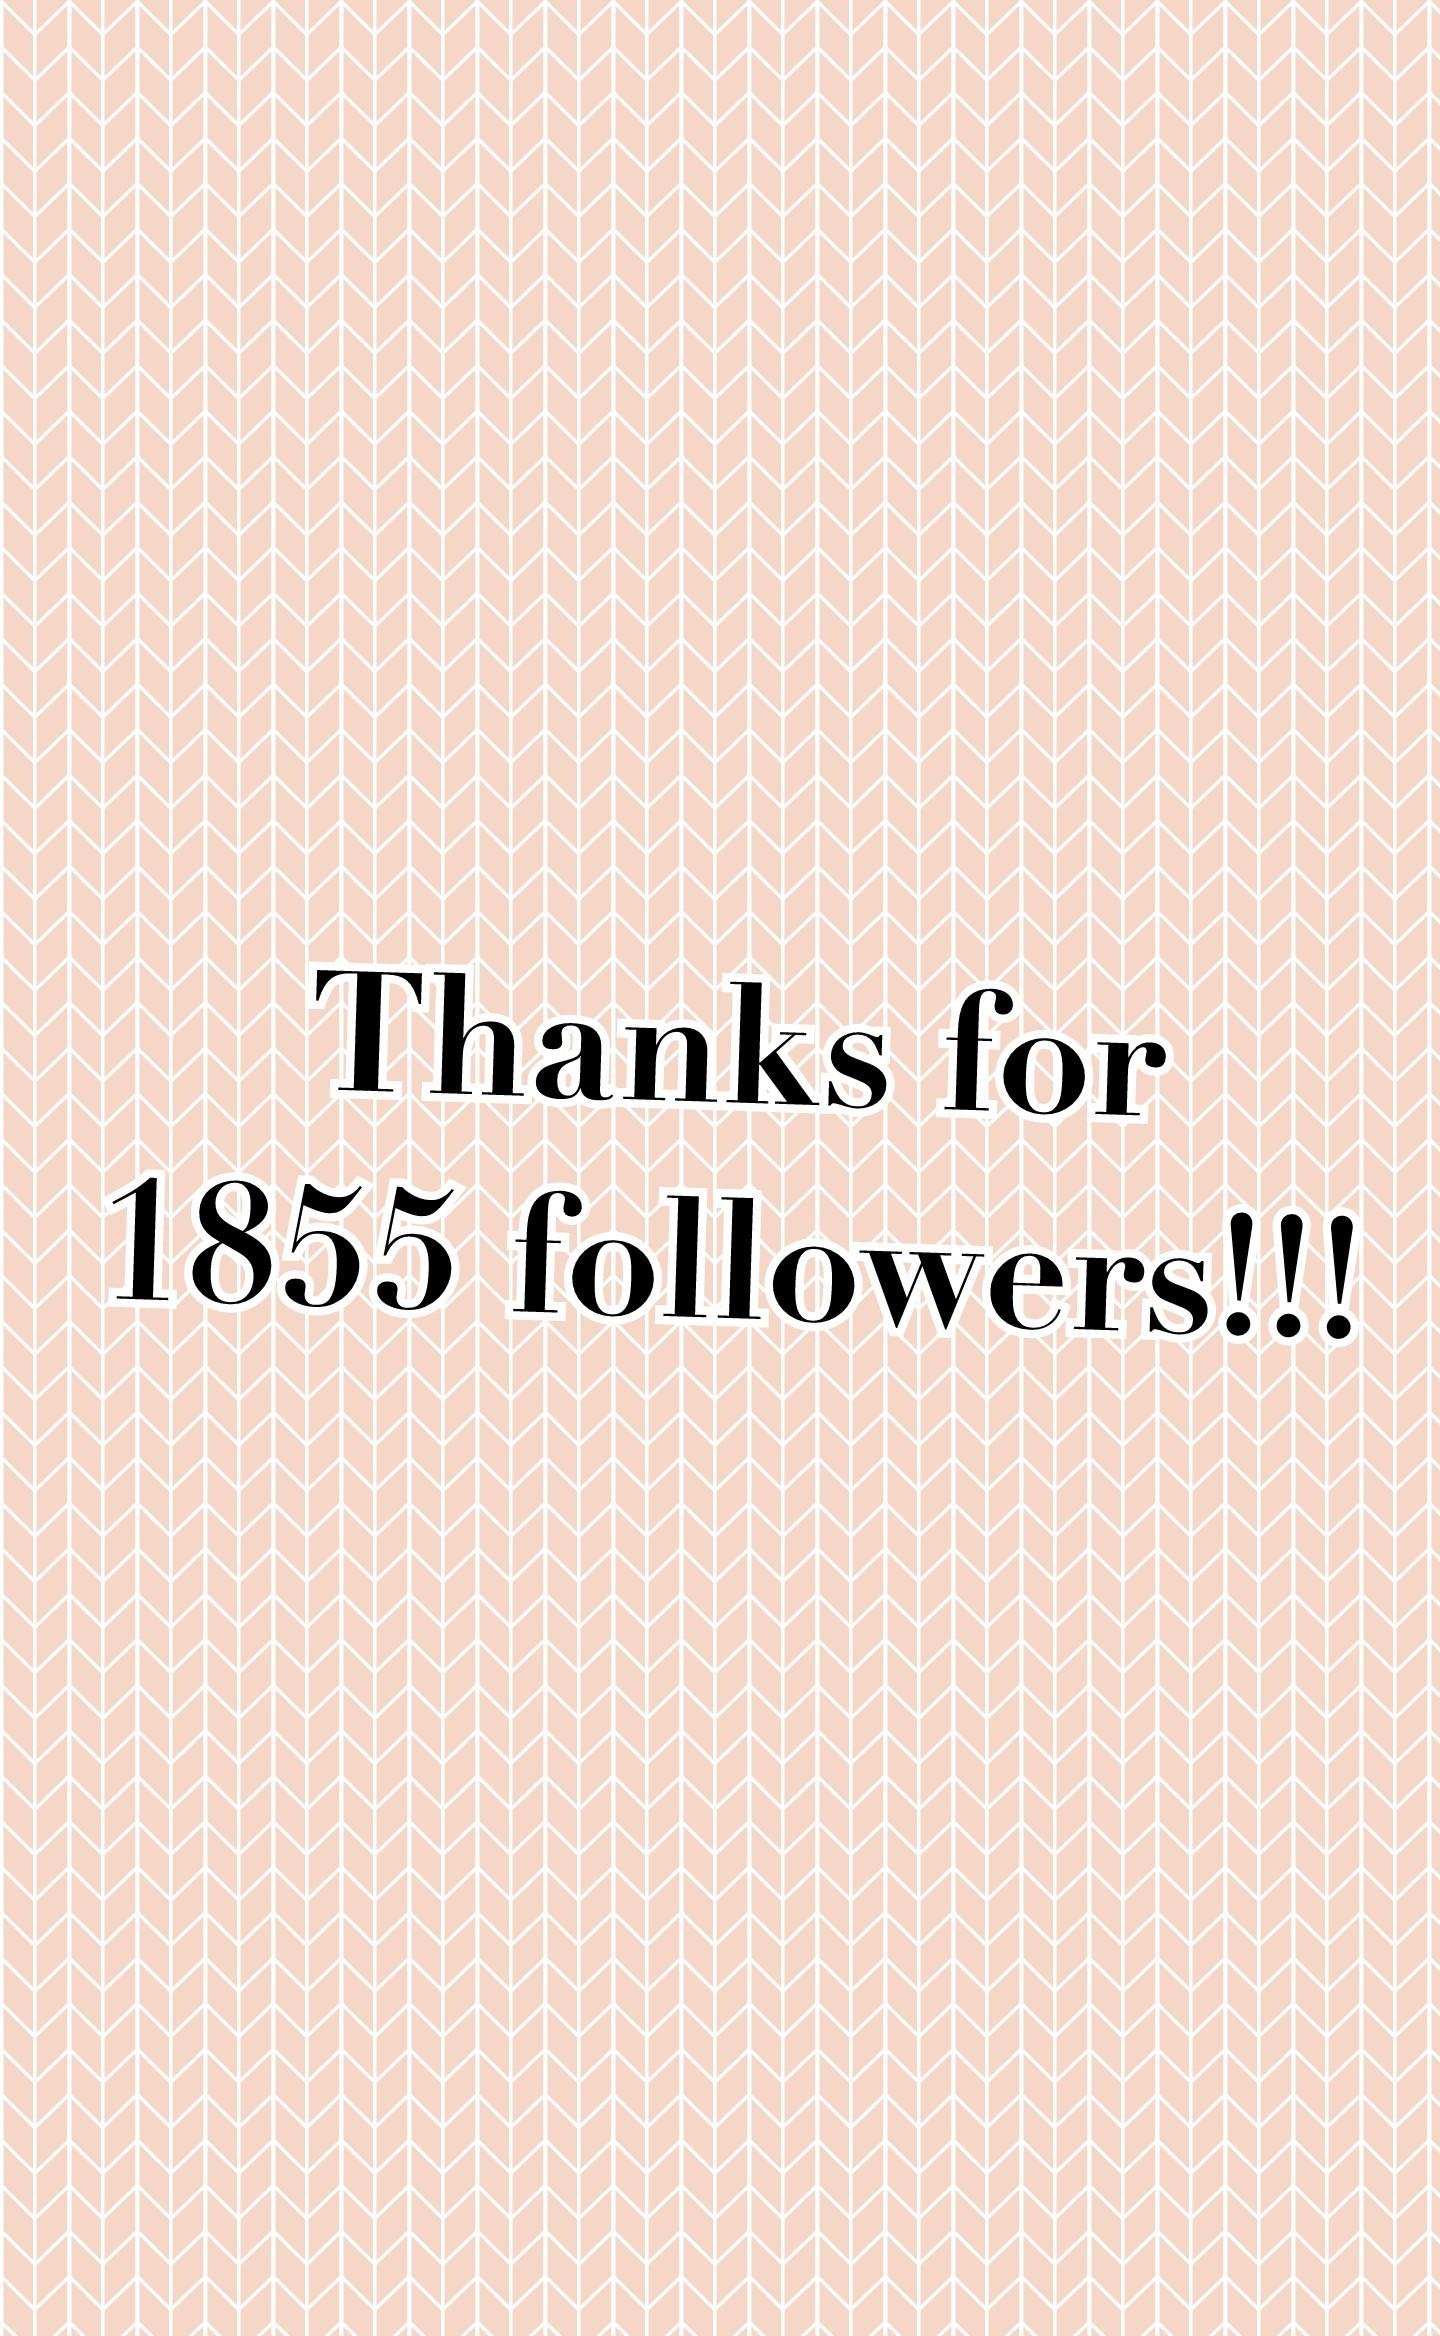 Thanks for
1855 followers!!!